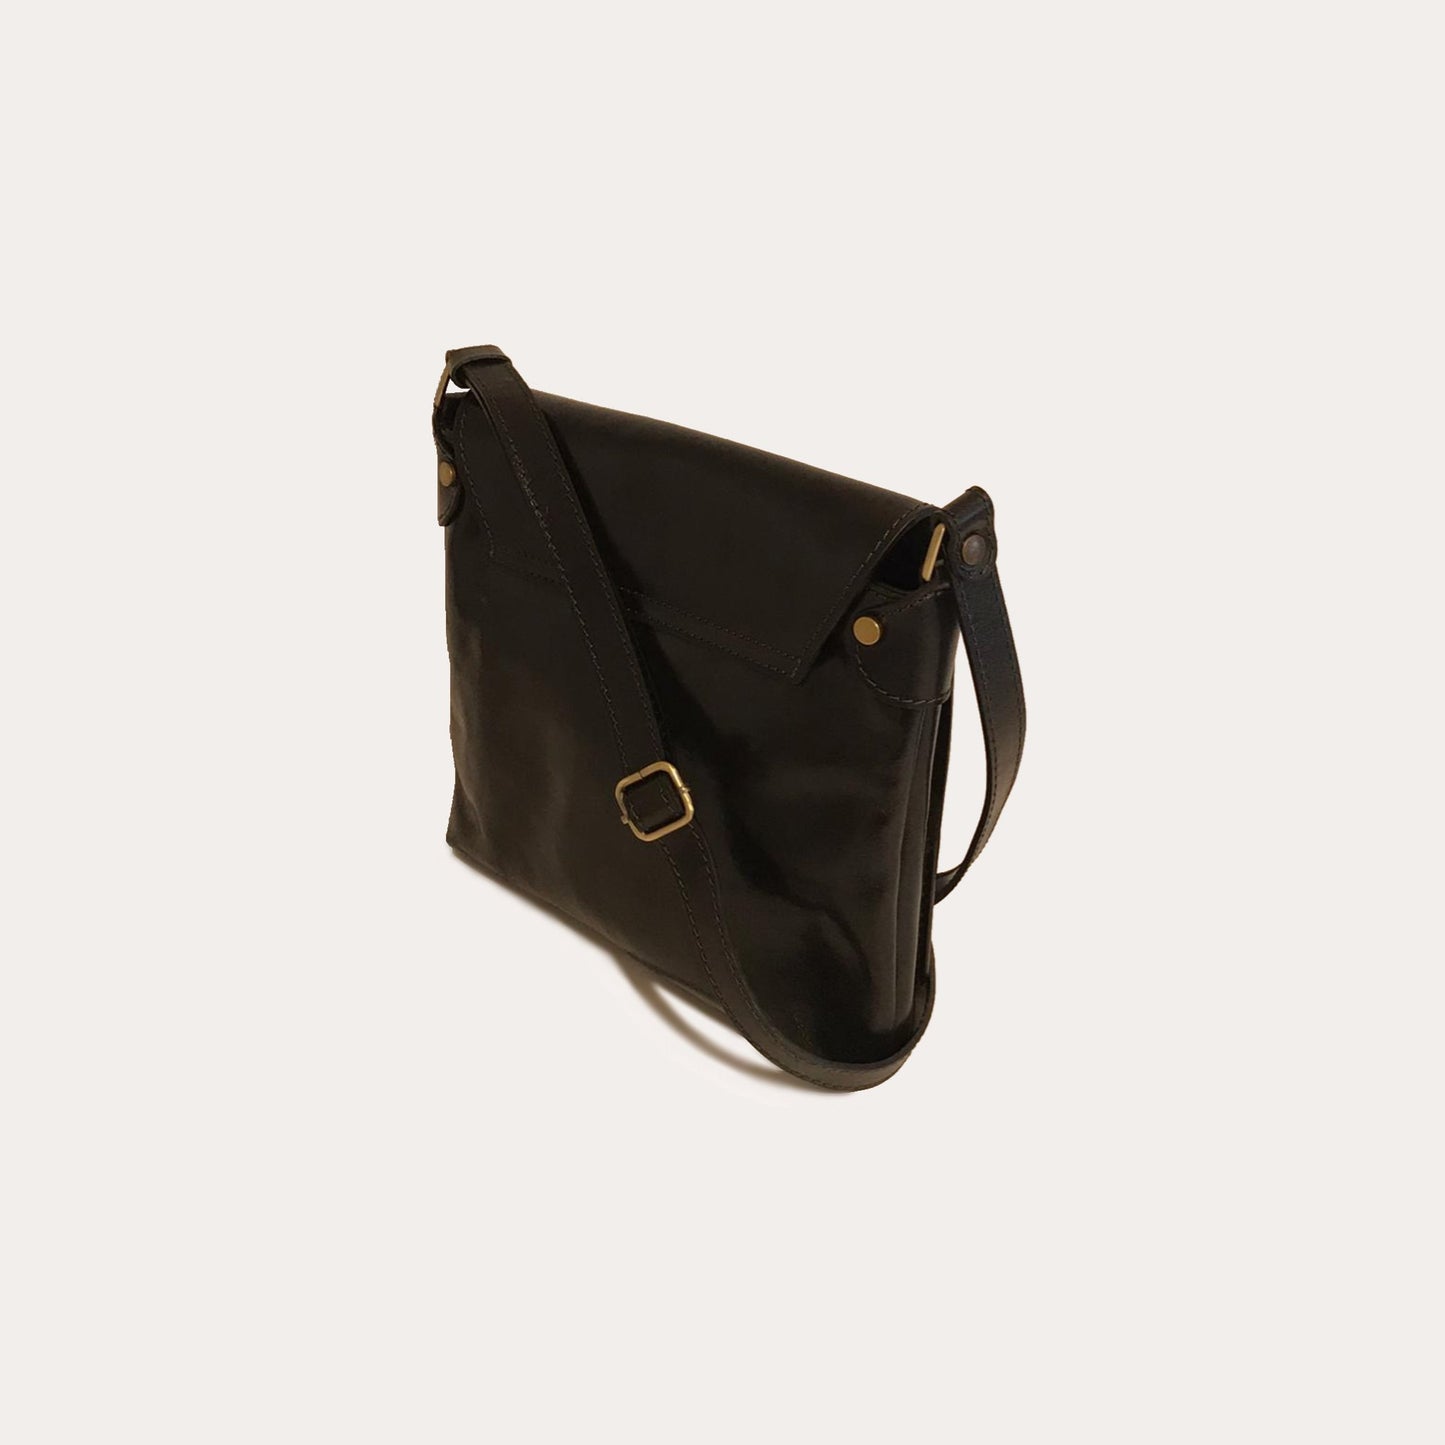 Black Leather Bag with Flap